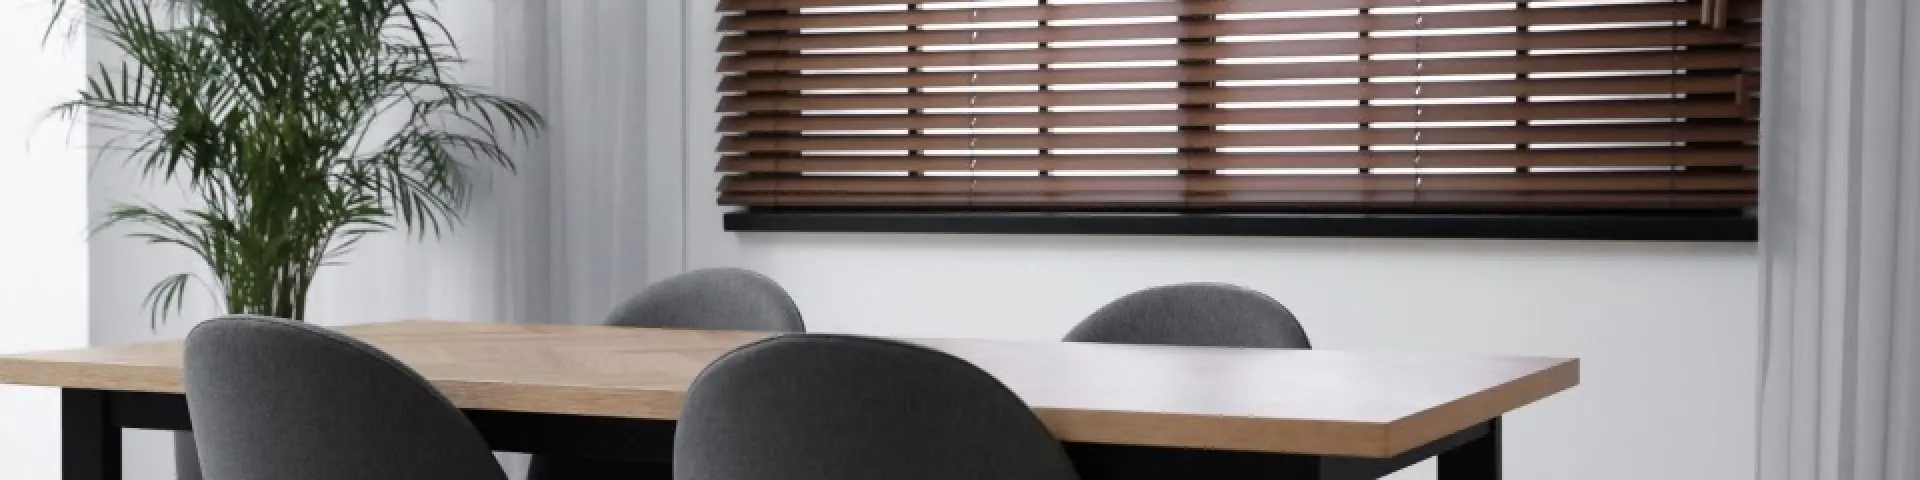 Wooden or bamboo blinds, which one to choose?, Manufacturer of Plated,  Venetian and Roller Blinds